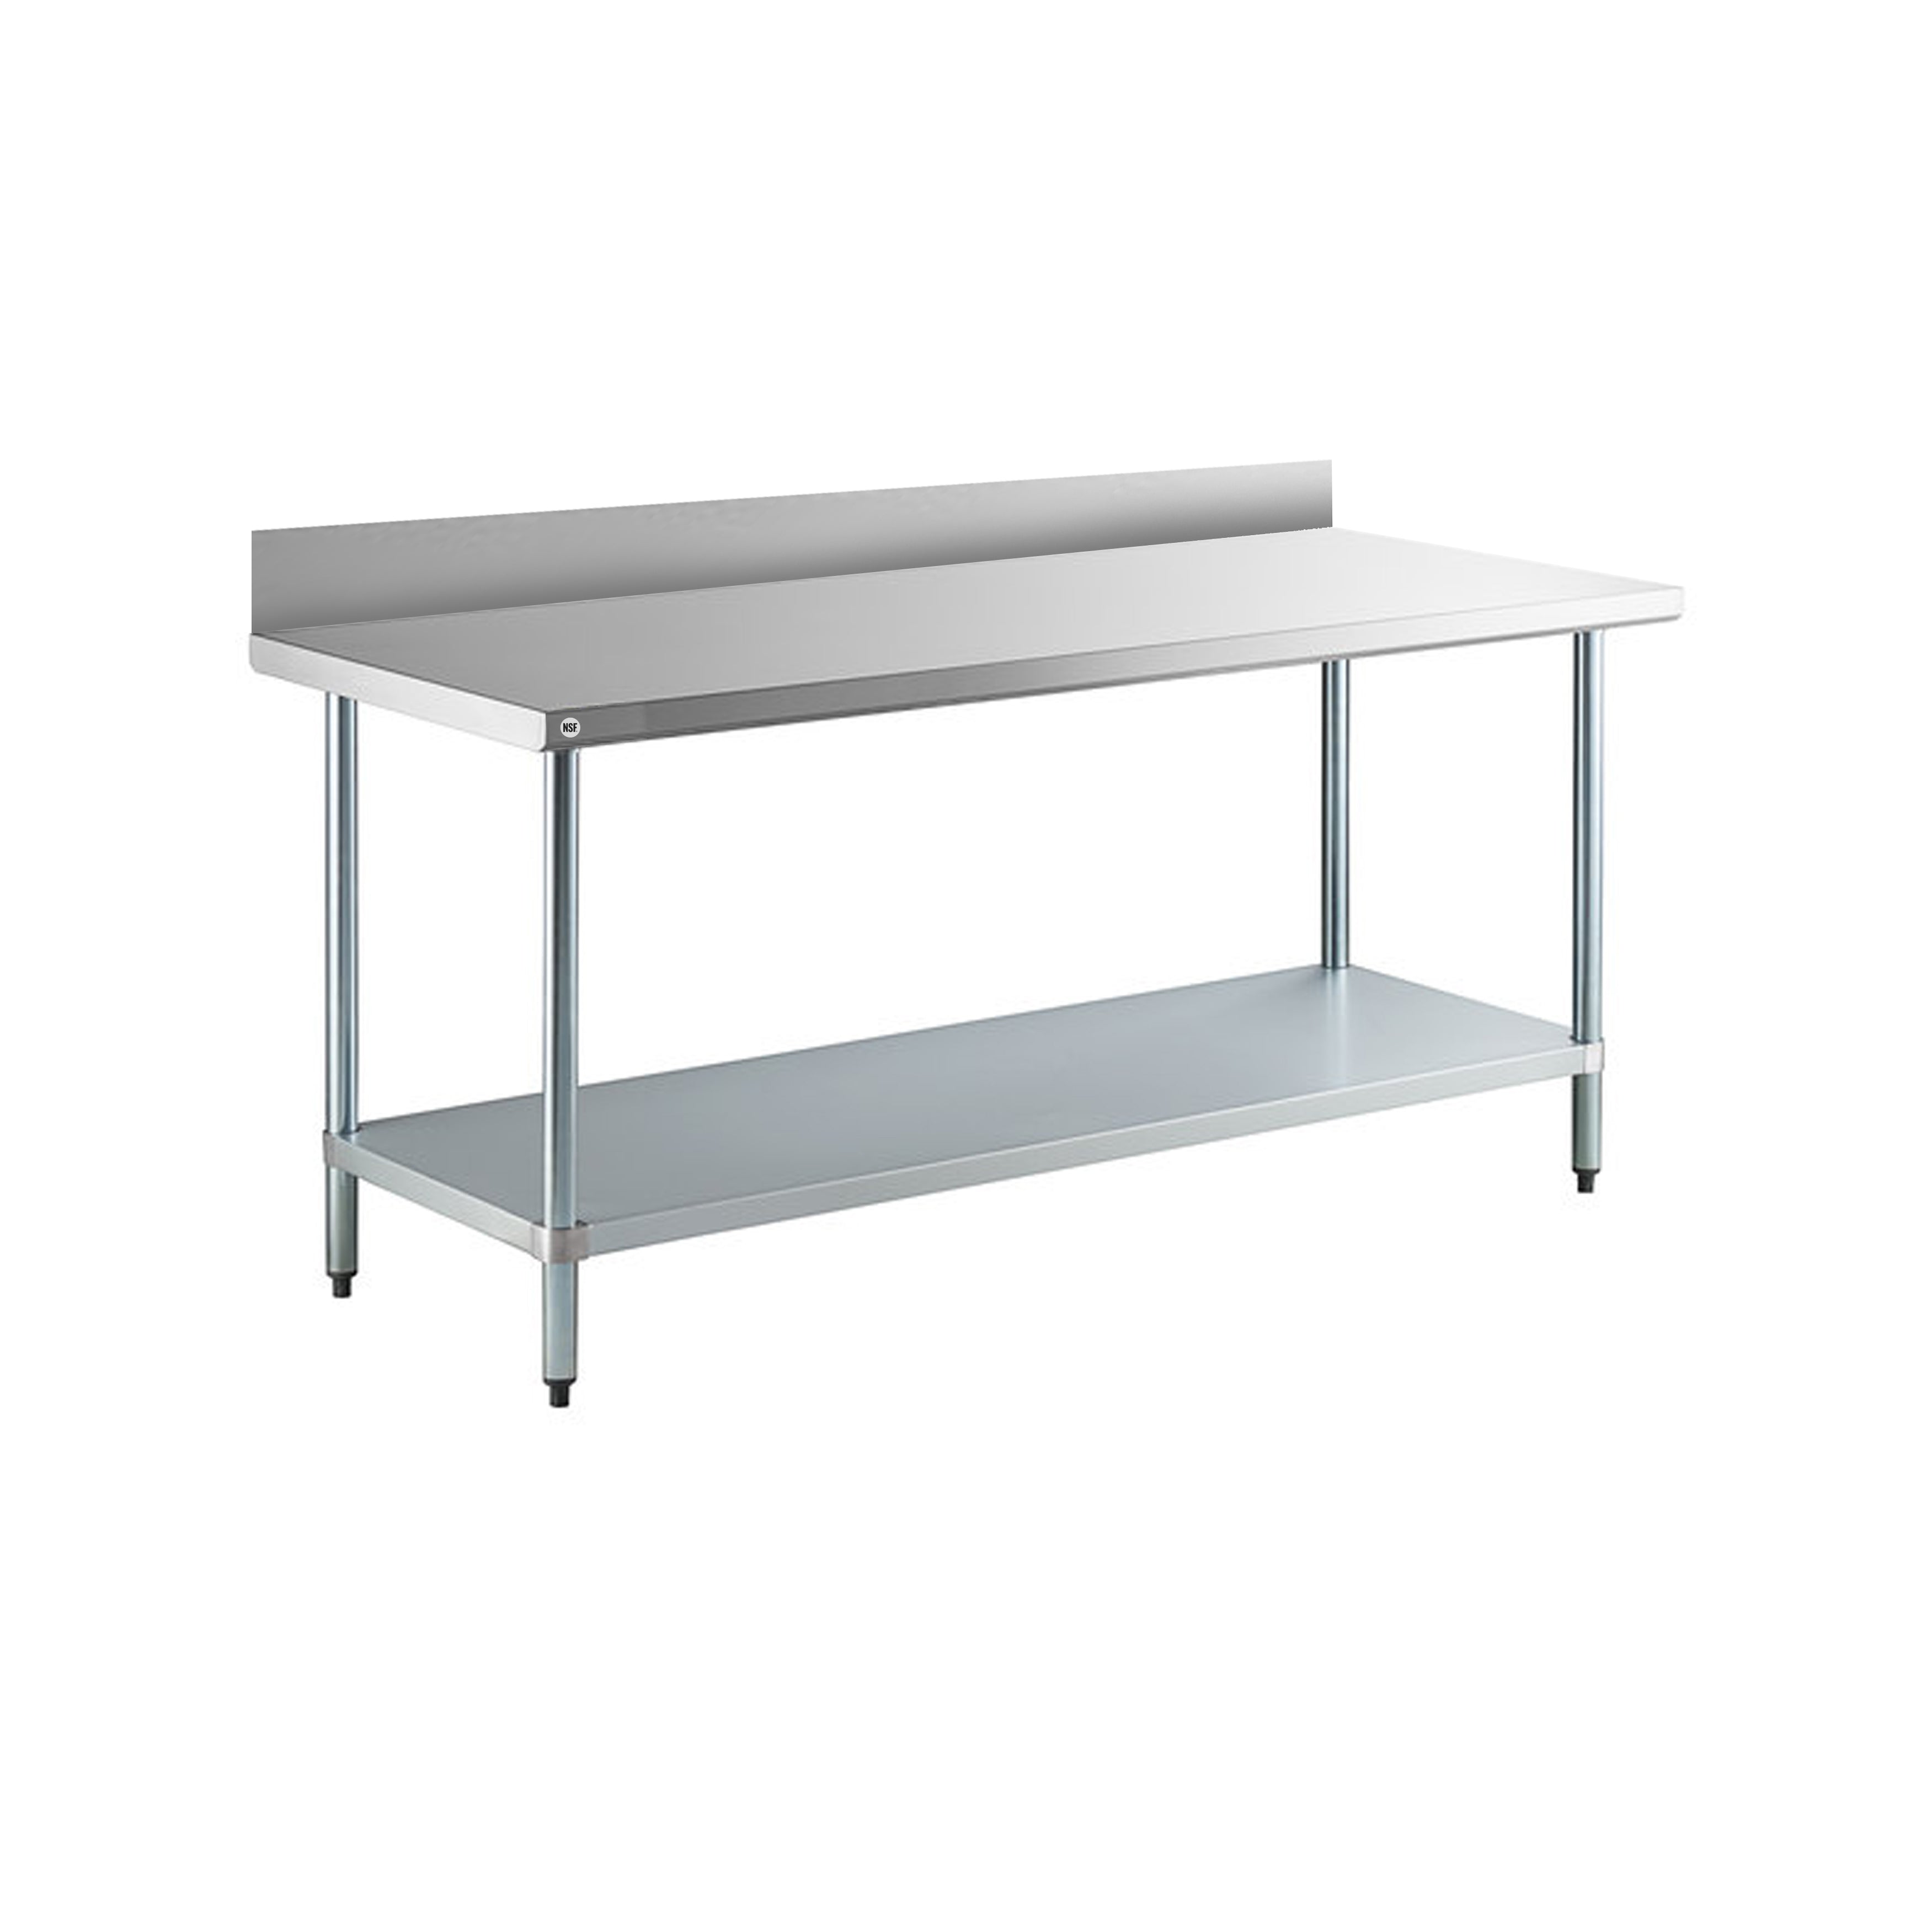 Omcan - 23794, Commercial 30" x 24" Stainless Steel Kitchen Work Table with 4" BackSplash 800lbs Medium Duty